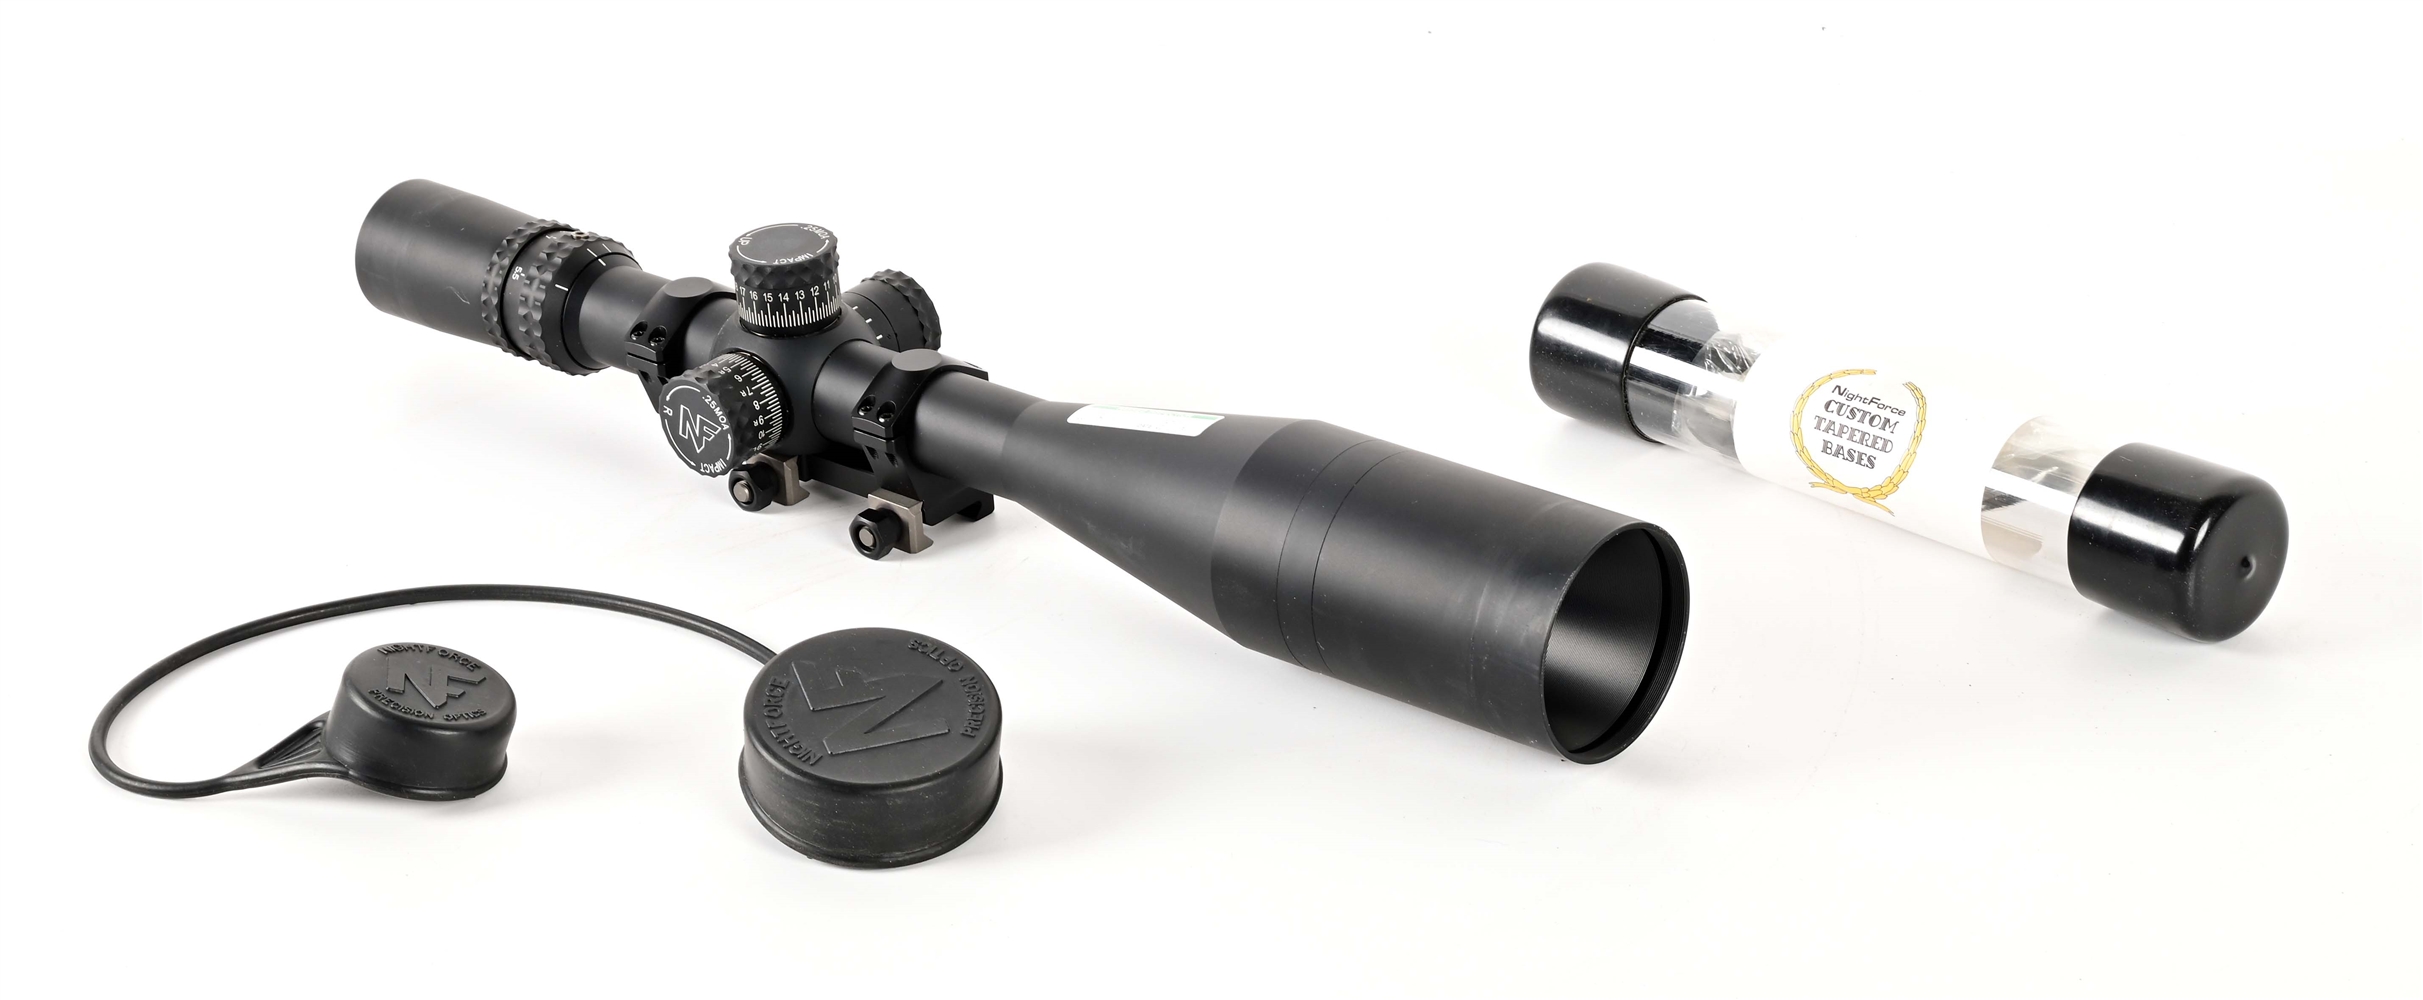 NIGHTFORCE NXS 5.5-22X56 SCOPE WITH EXTRA SET OF RINGS.